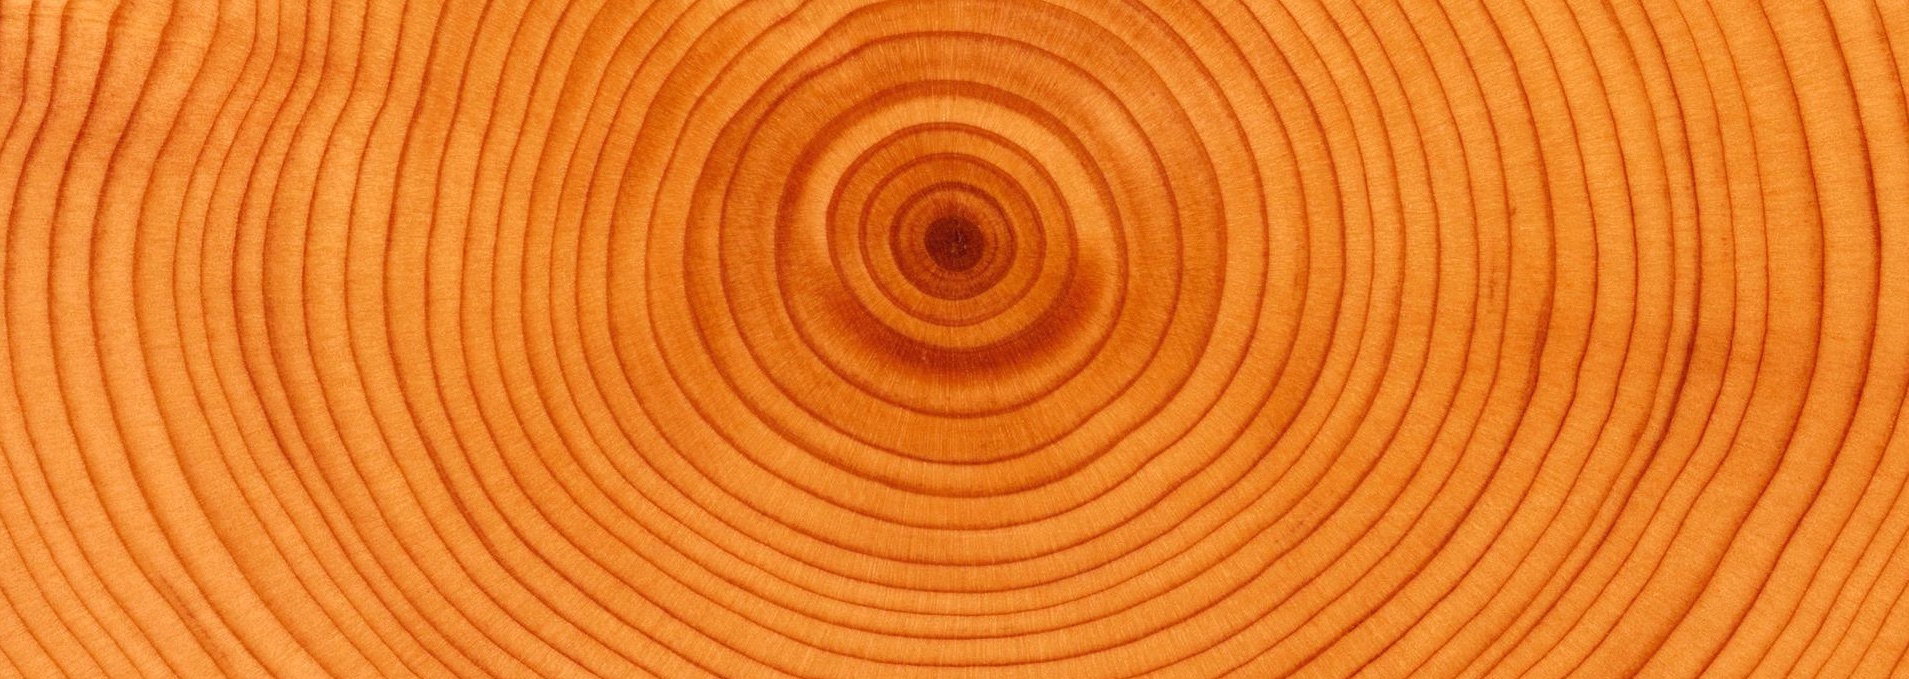 tree-rings, journal of wild culture ©2020